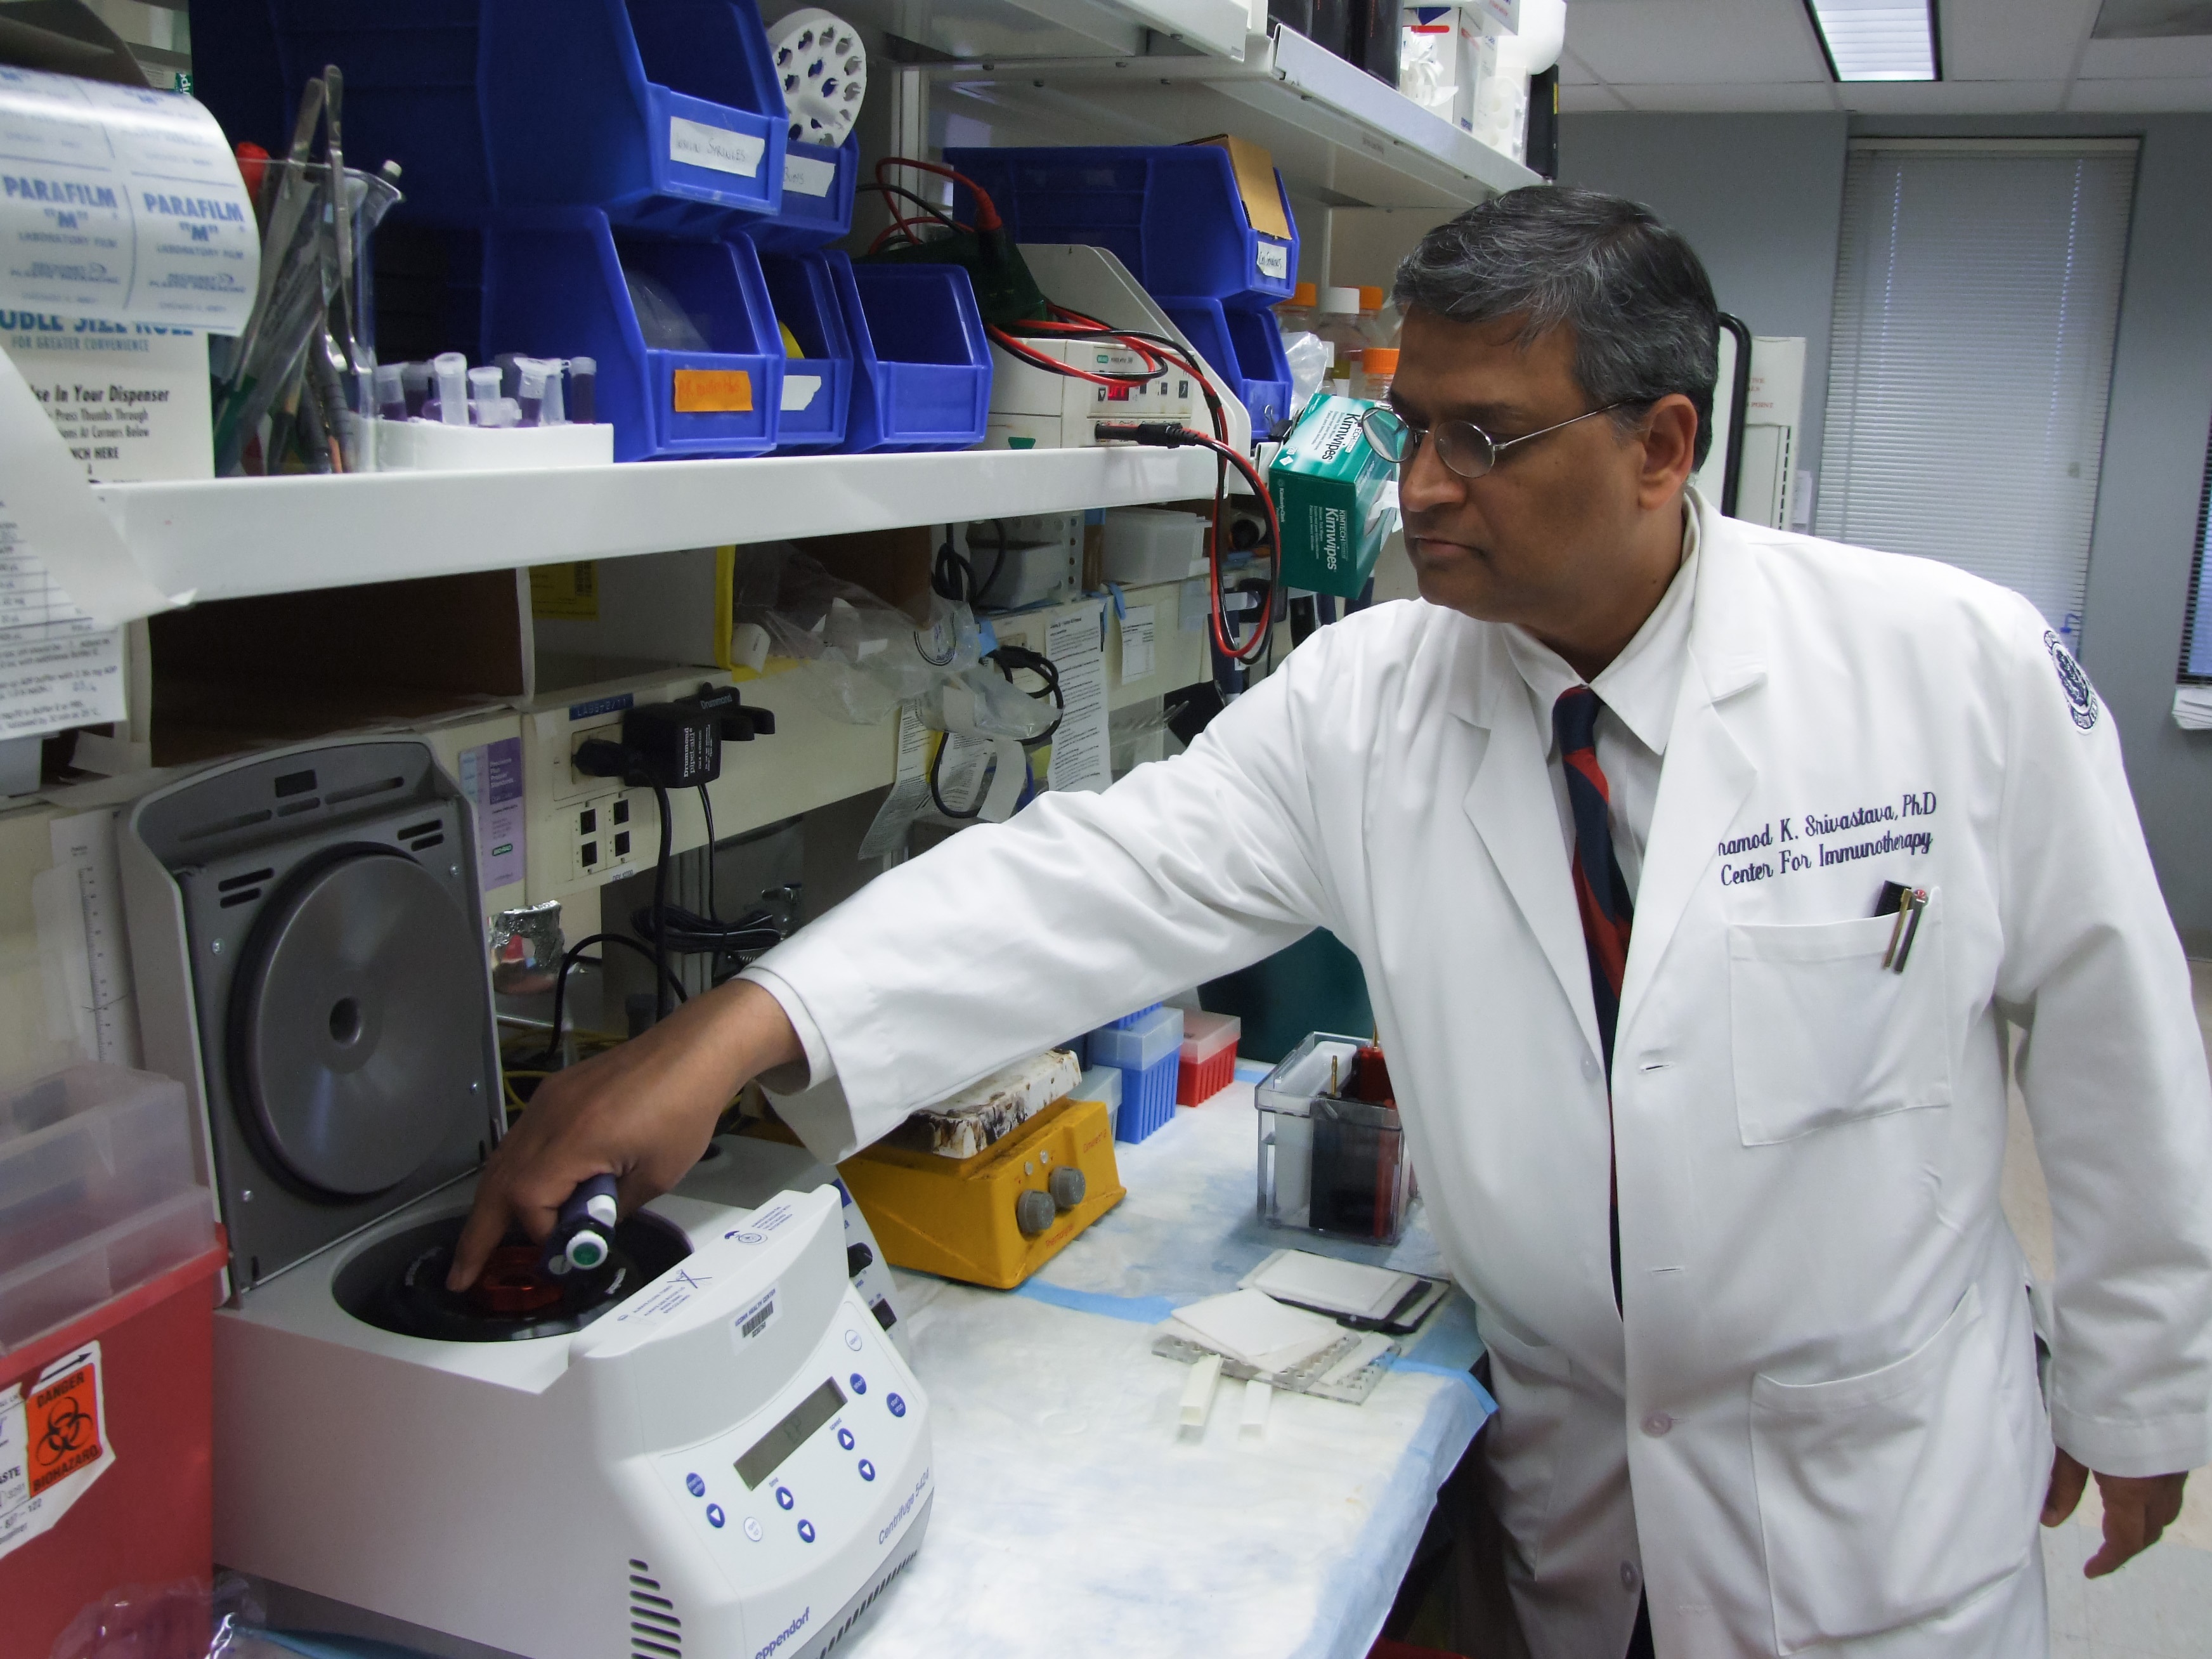 Award-winning physician-scientist Dr. Pramod K. Srivastava, director of the Carole and Ray Neag Comprehensive Cancer Center in his lab at UConn Health is developing a novel immunotherapy vaccine for difficult to treat ovarian cancer